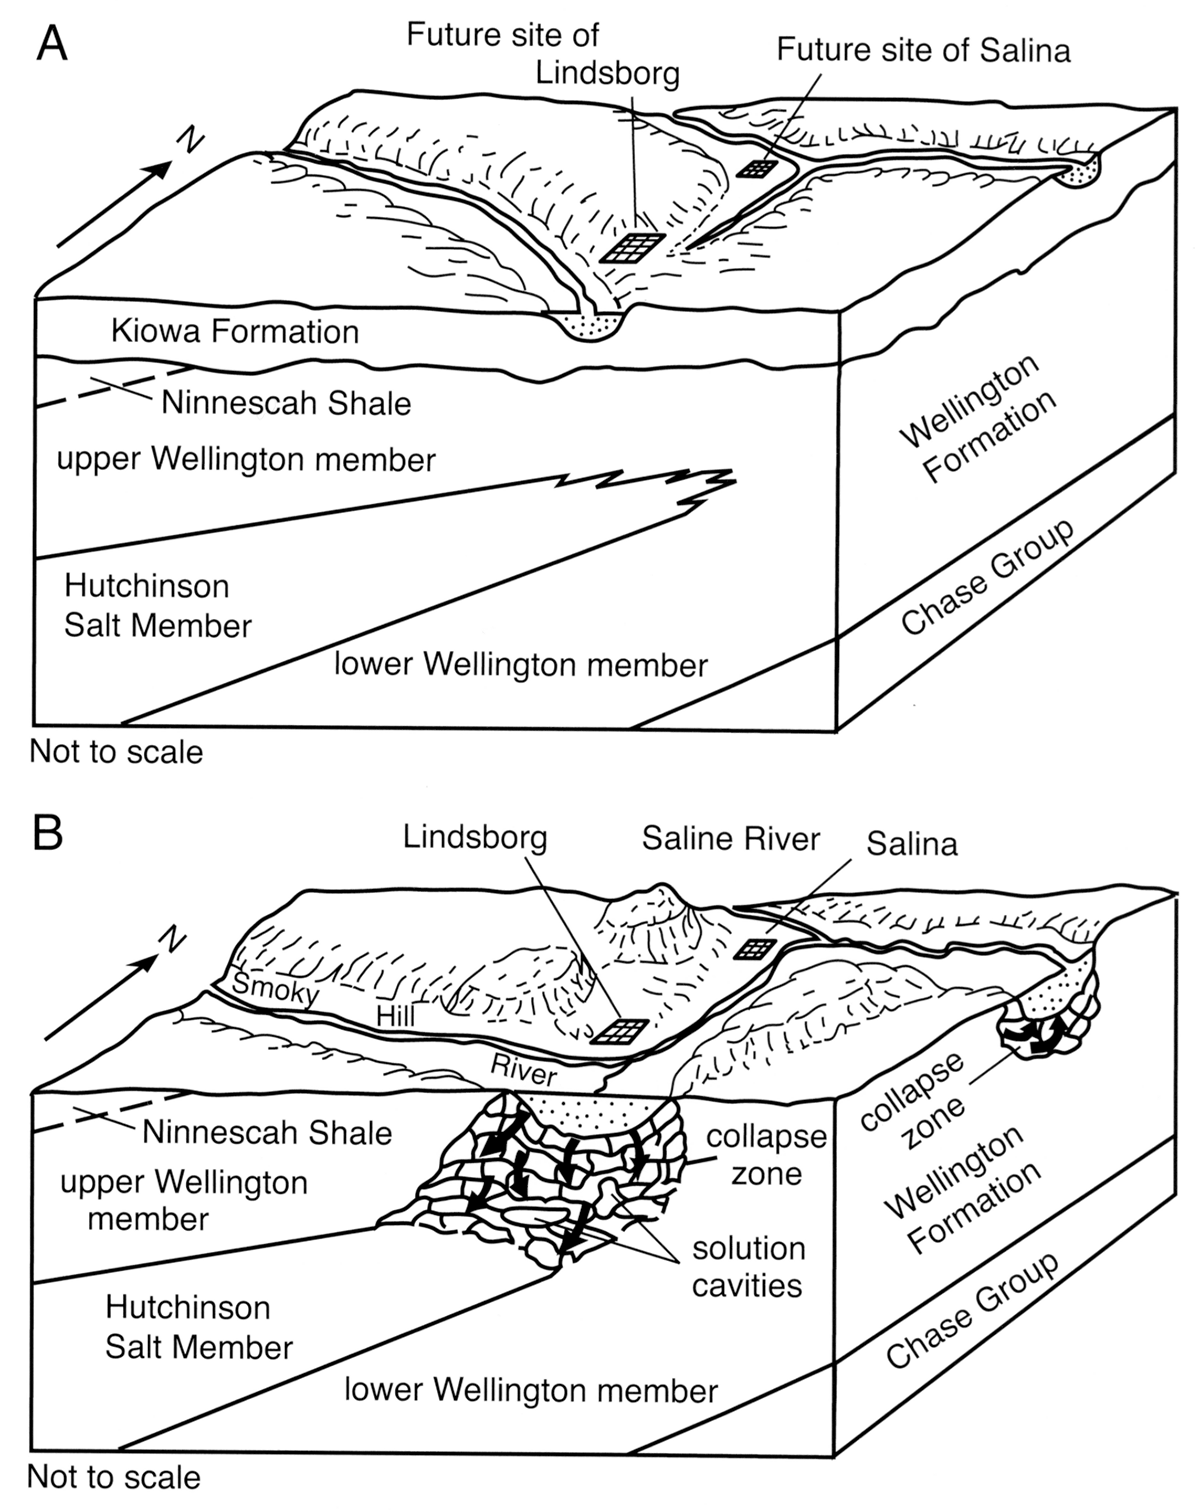 Development of the evaporite dissolution zone at the updip edge of the Hutchinson Salt Member of the Wellington Formation in central Kansas between Cretaceous time (A) and the present (B).